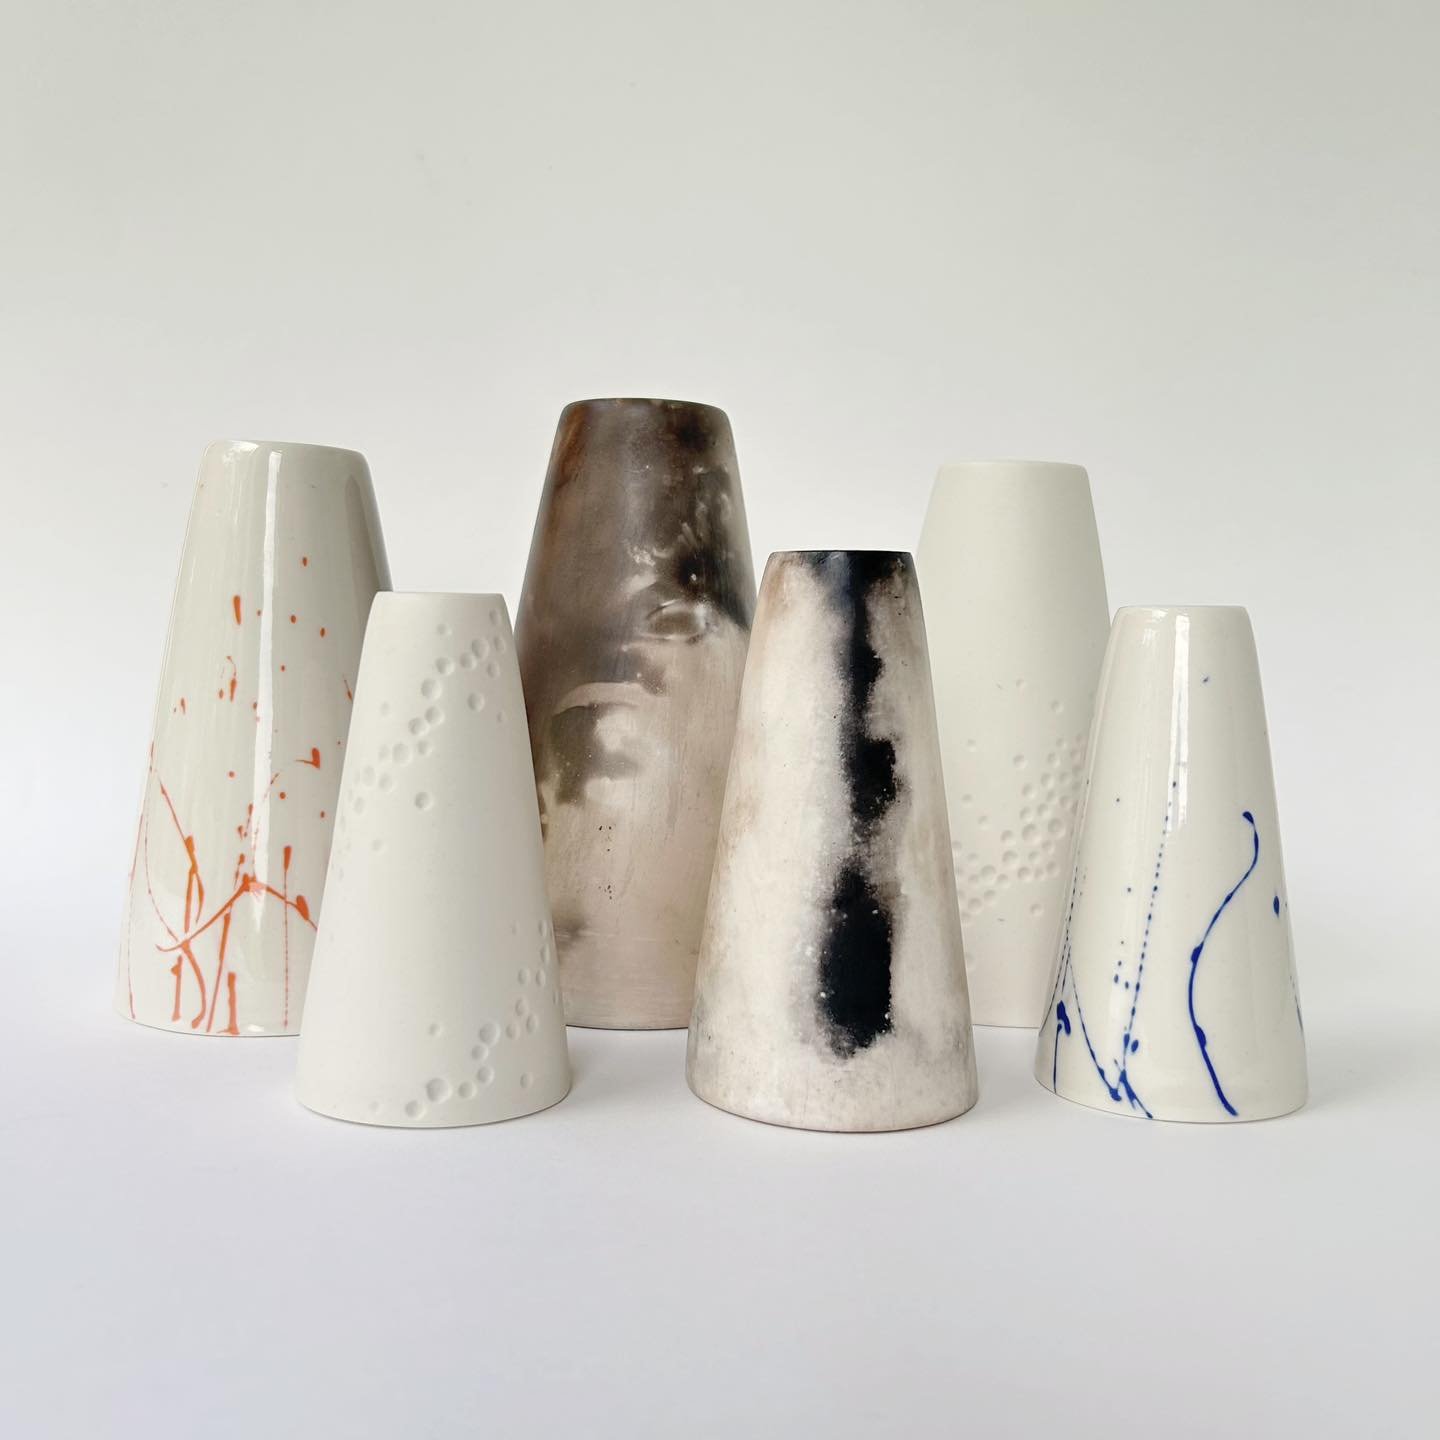 Back in the studio today casting vases because they were popular at Ceramics in Charnwood&hellip;.. 

This is always a strange one. It seems to be an unwritten rule that if something is popular at one show and you make a load for the next one then no